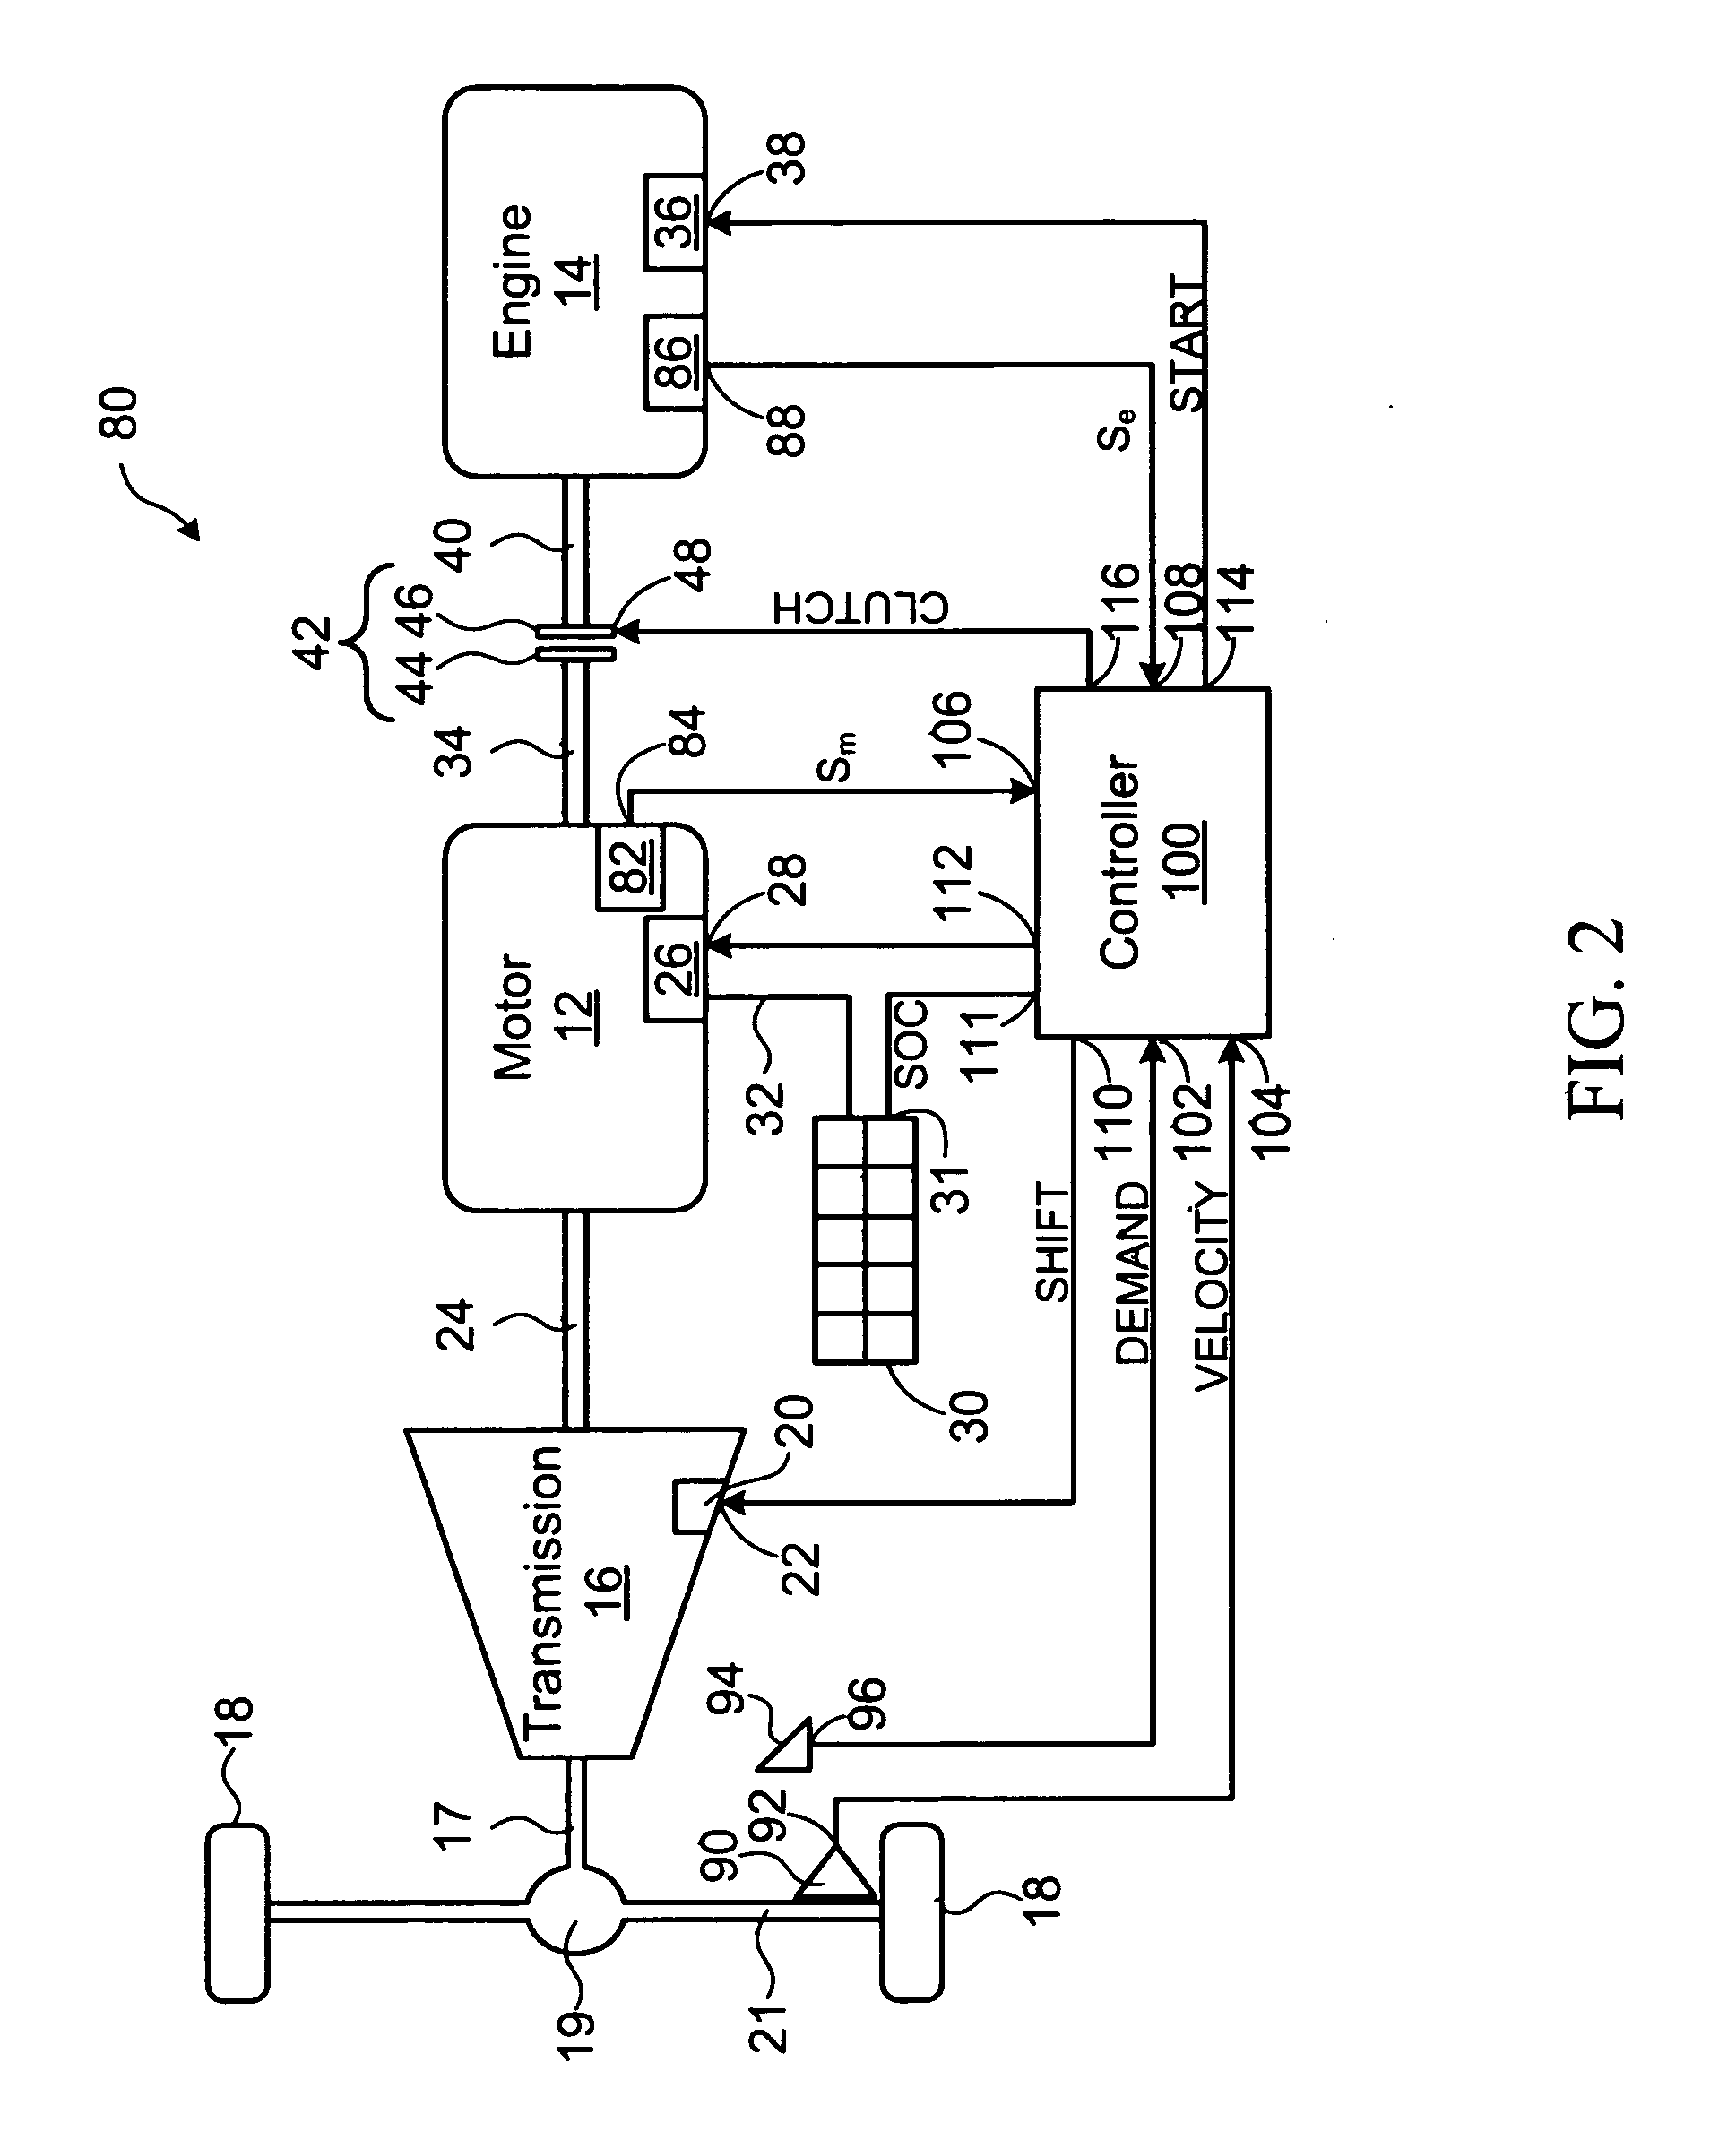 Method and apparatus for starting an engine in a hybrid vehicle